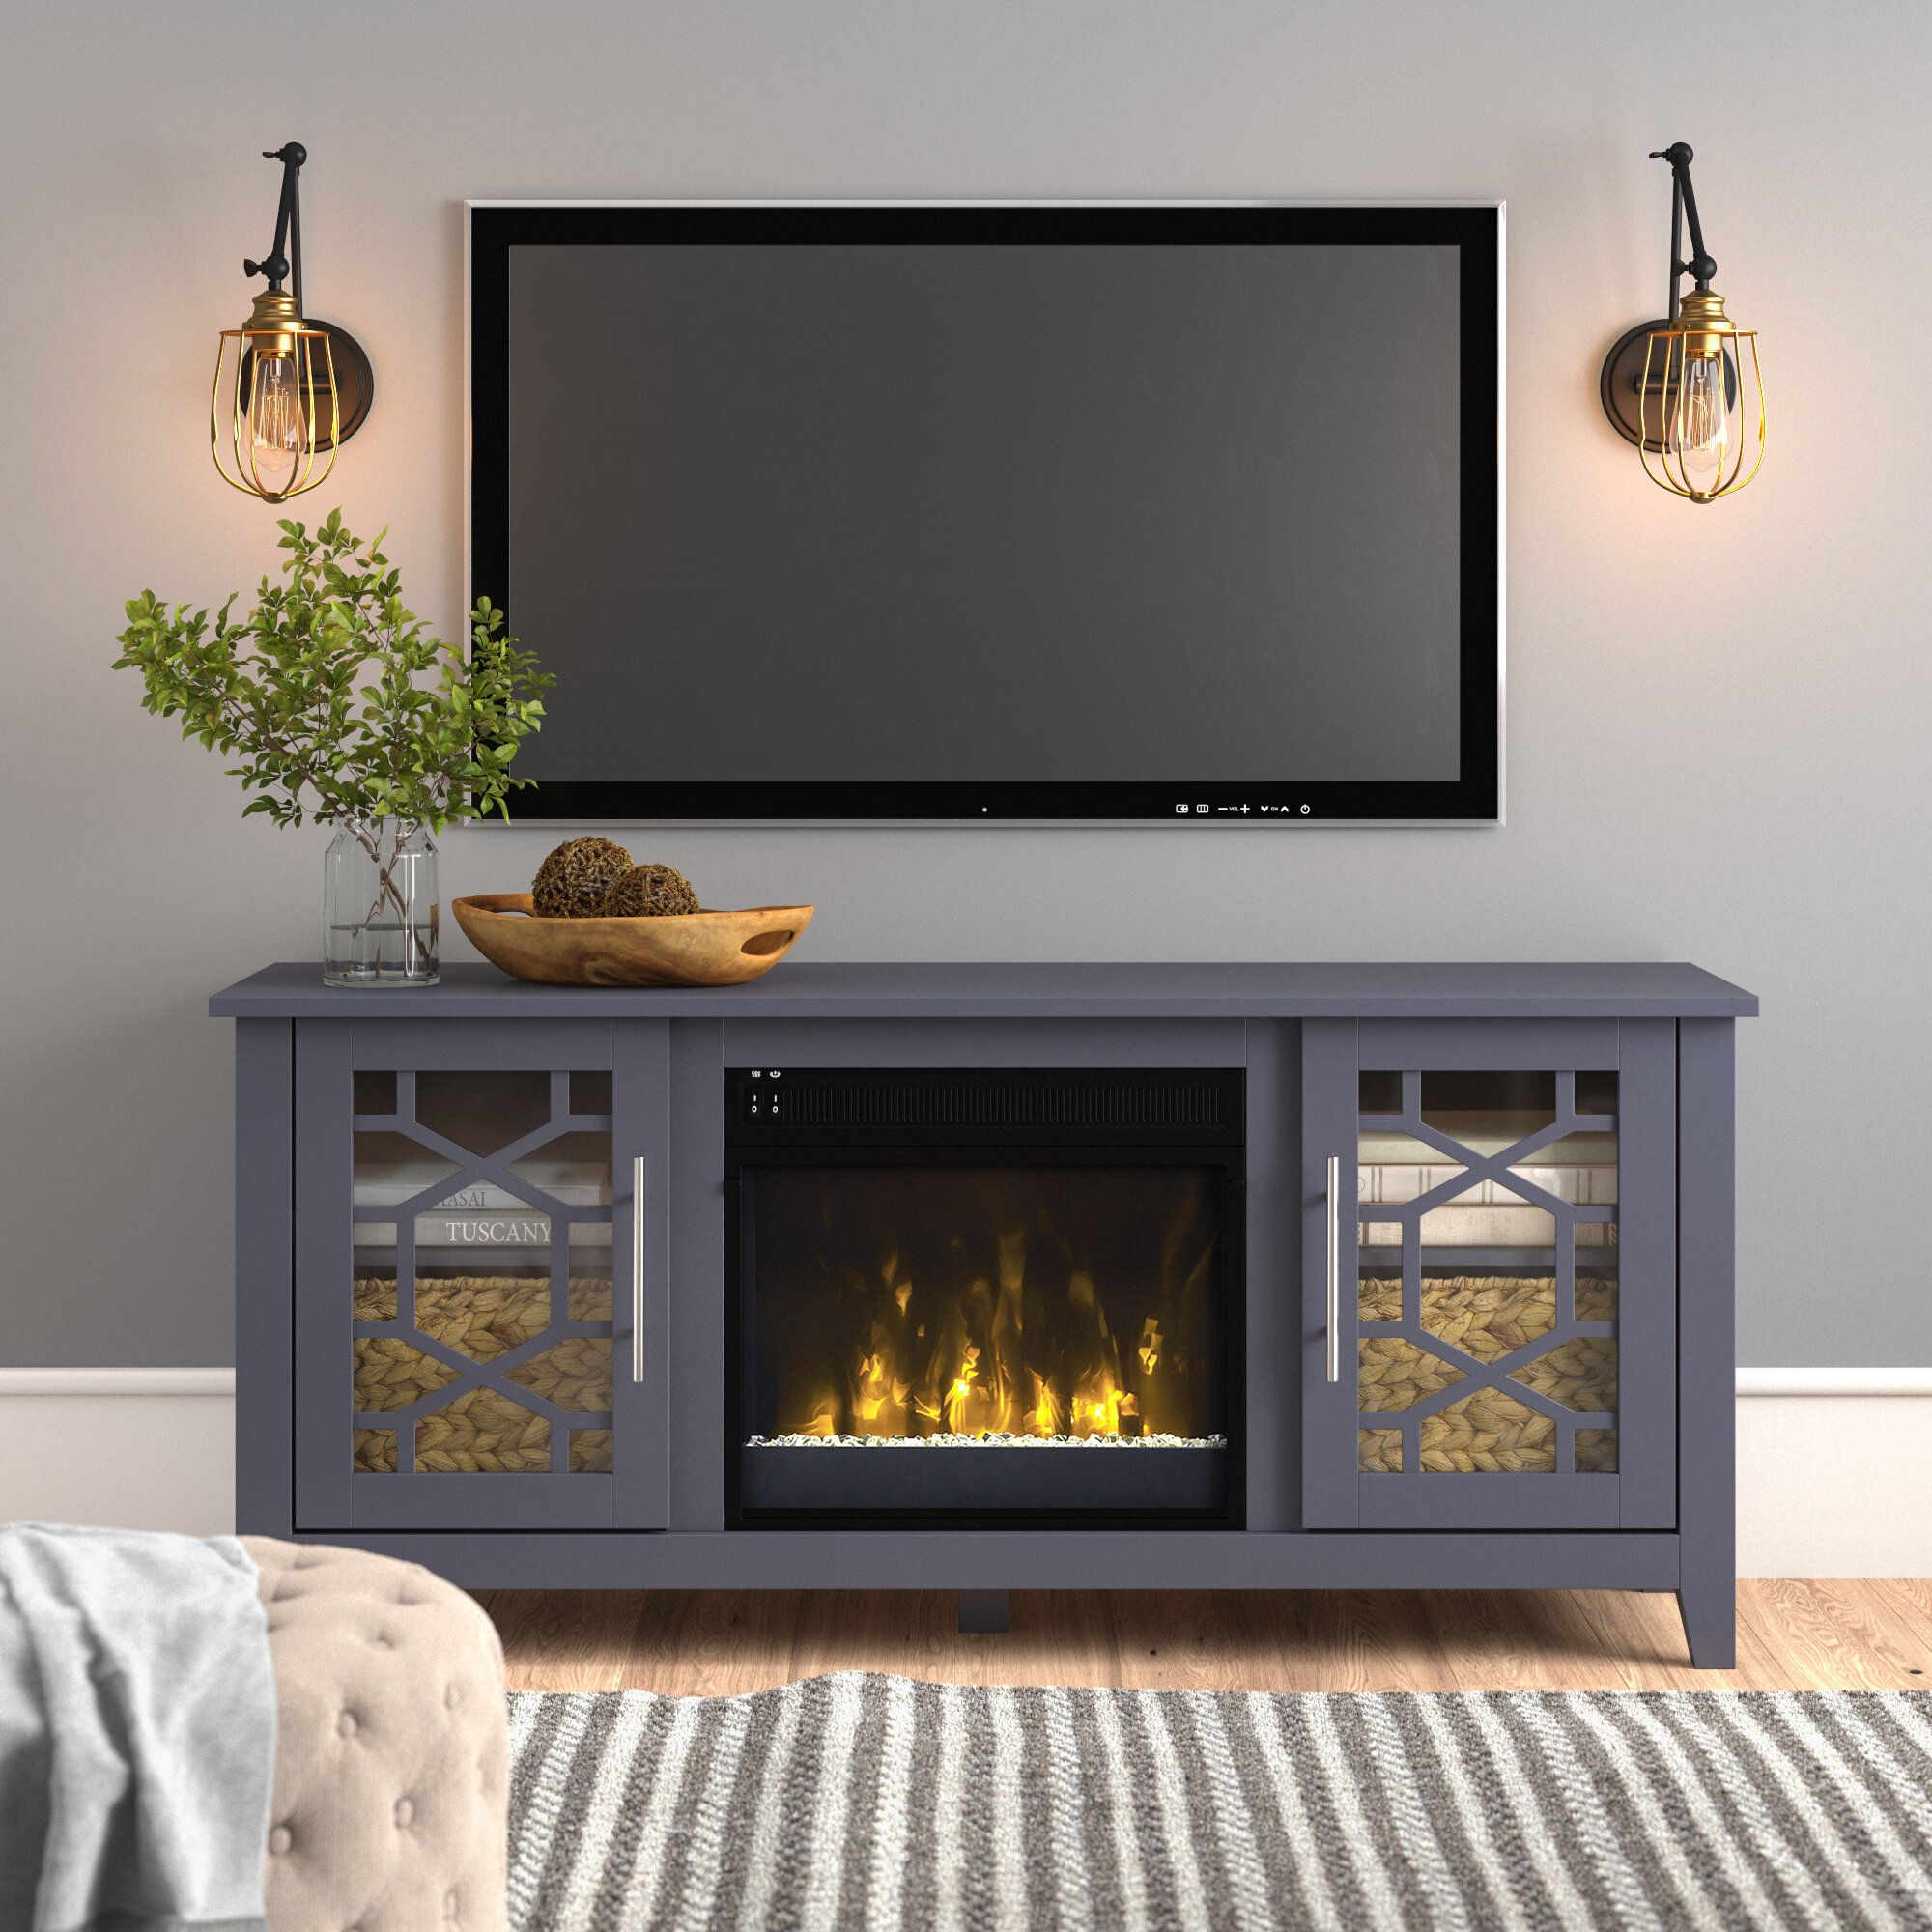 Farmhouse & Rustic 60 64 Inch Tv Stands | Birch Lane Intended For Parmelee Tv Stands For Tvs Up To 65" (View 30 of 30)